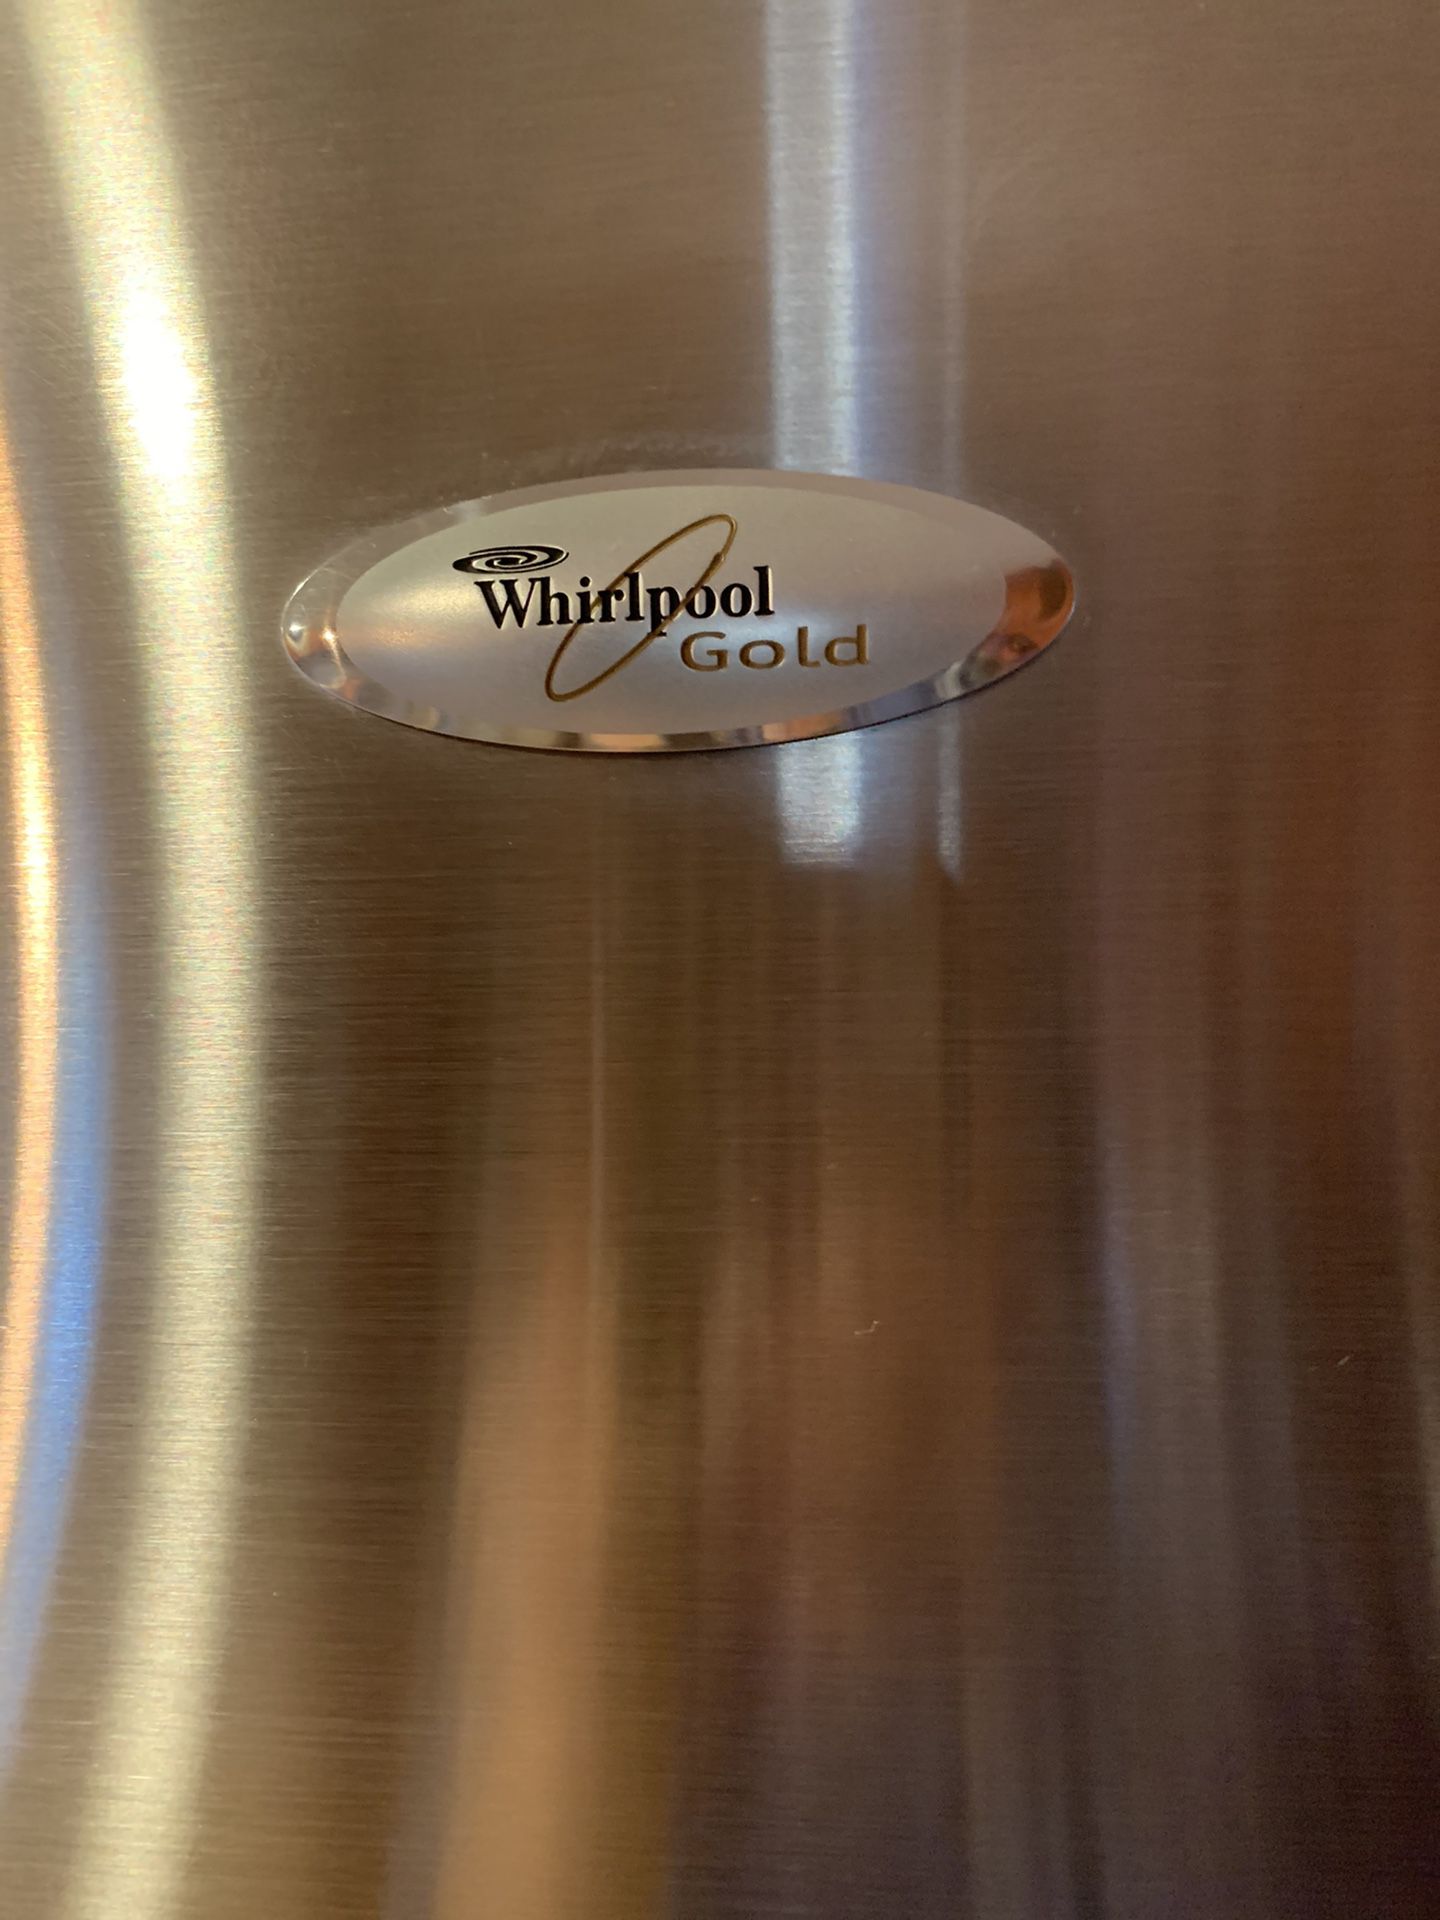 Stainless Steel Whirlpool Gold ENERGY STAR Qualified 22 cu. ft.